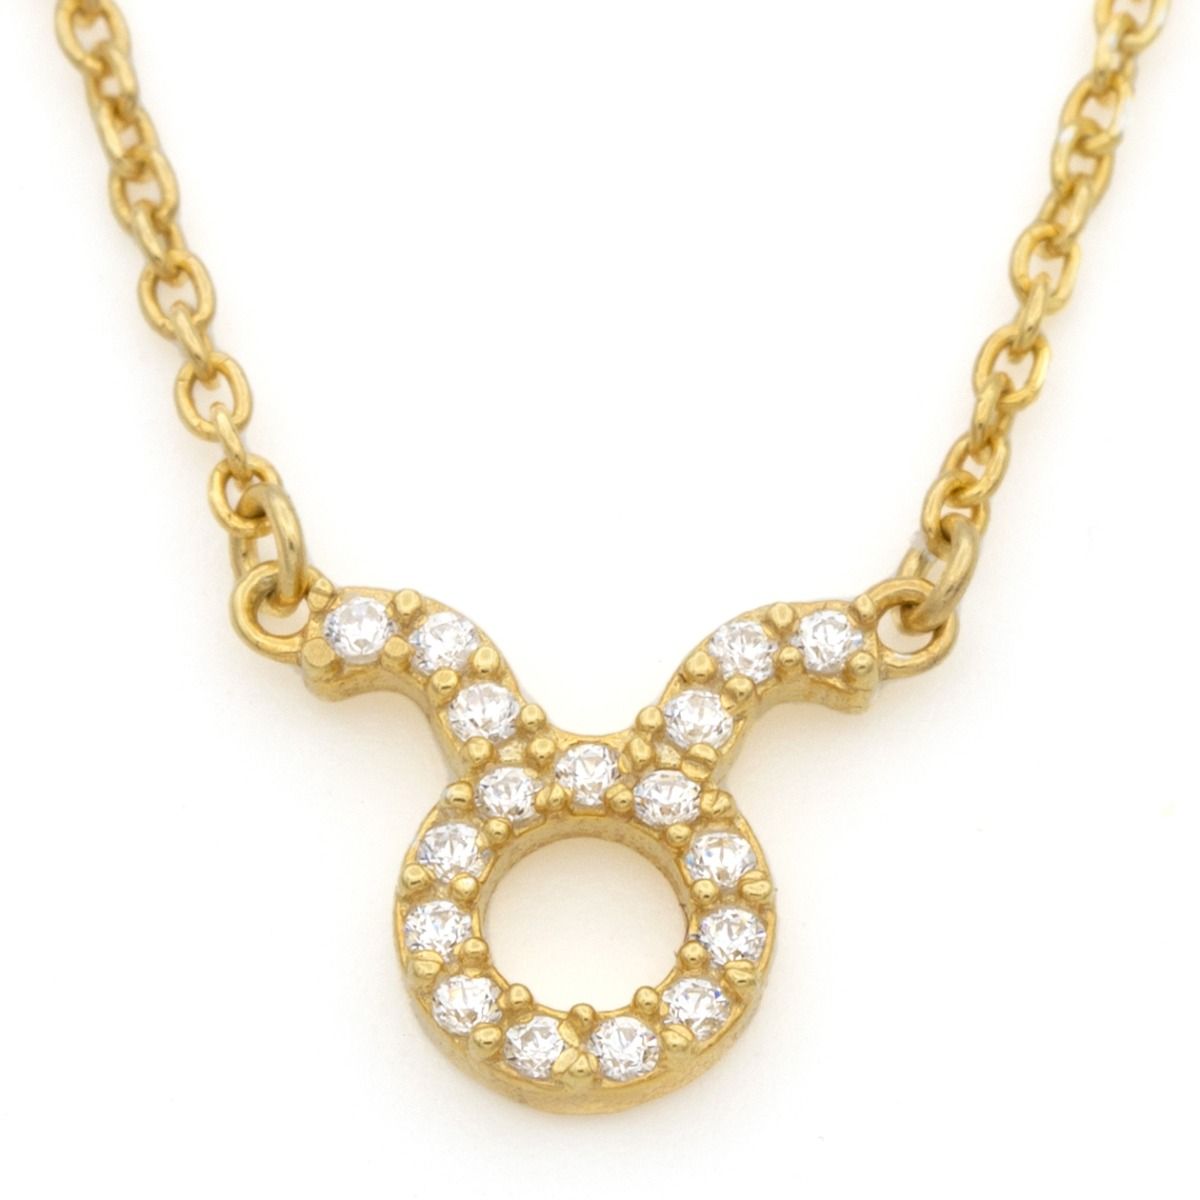 Taurus Zodiac Sign - Diamonds Vermeil) Necklace Talisa - (Gold Rolo Chain with